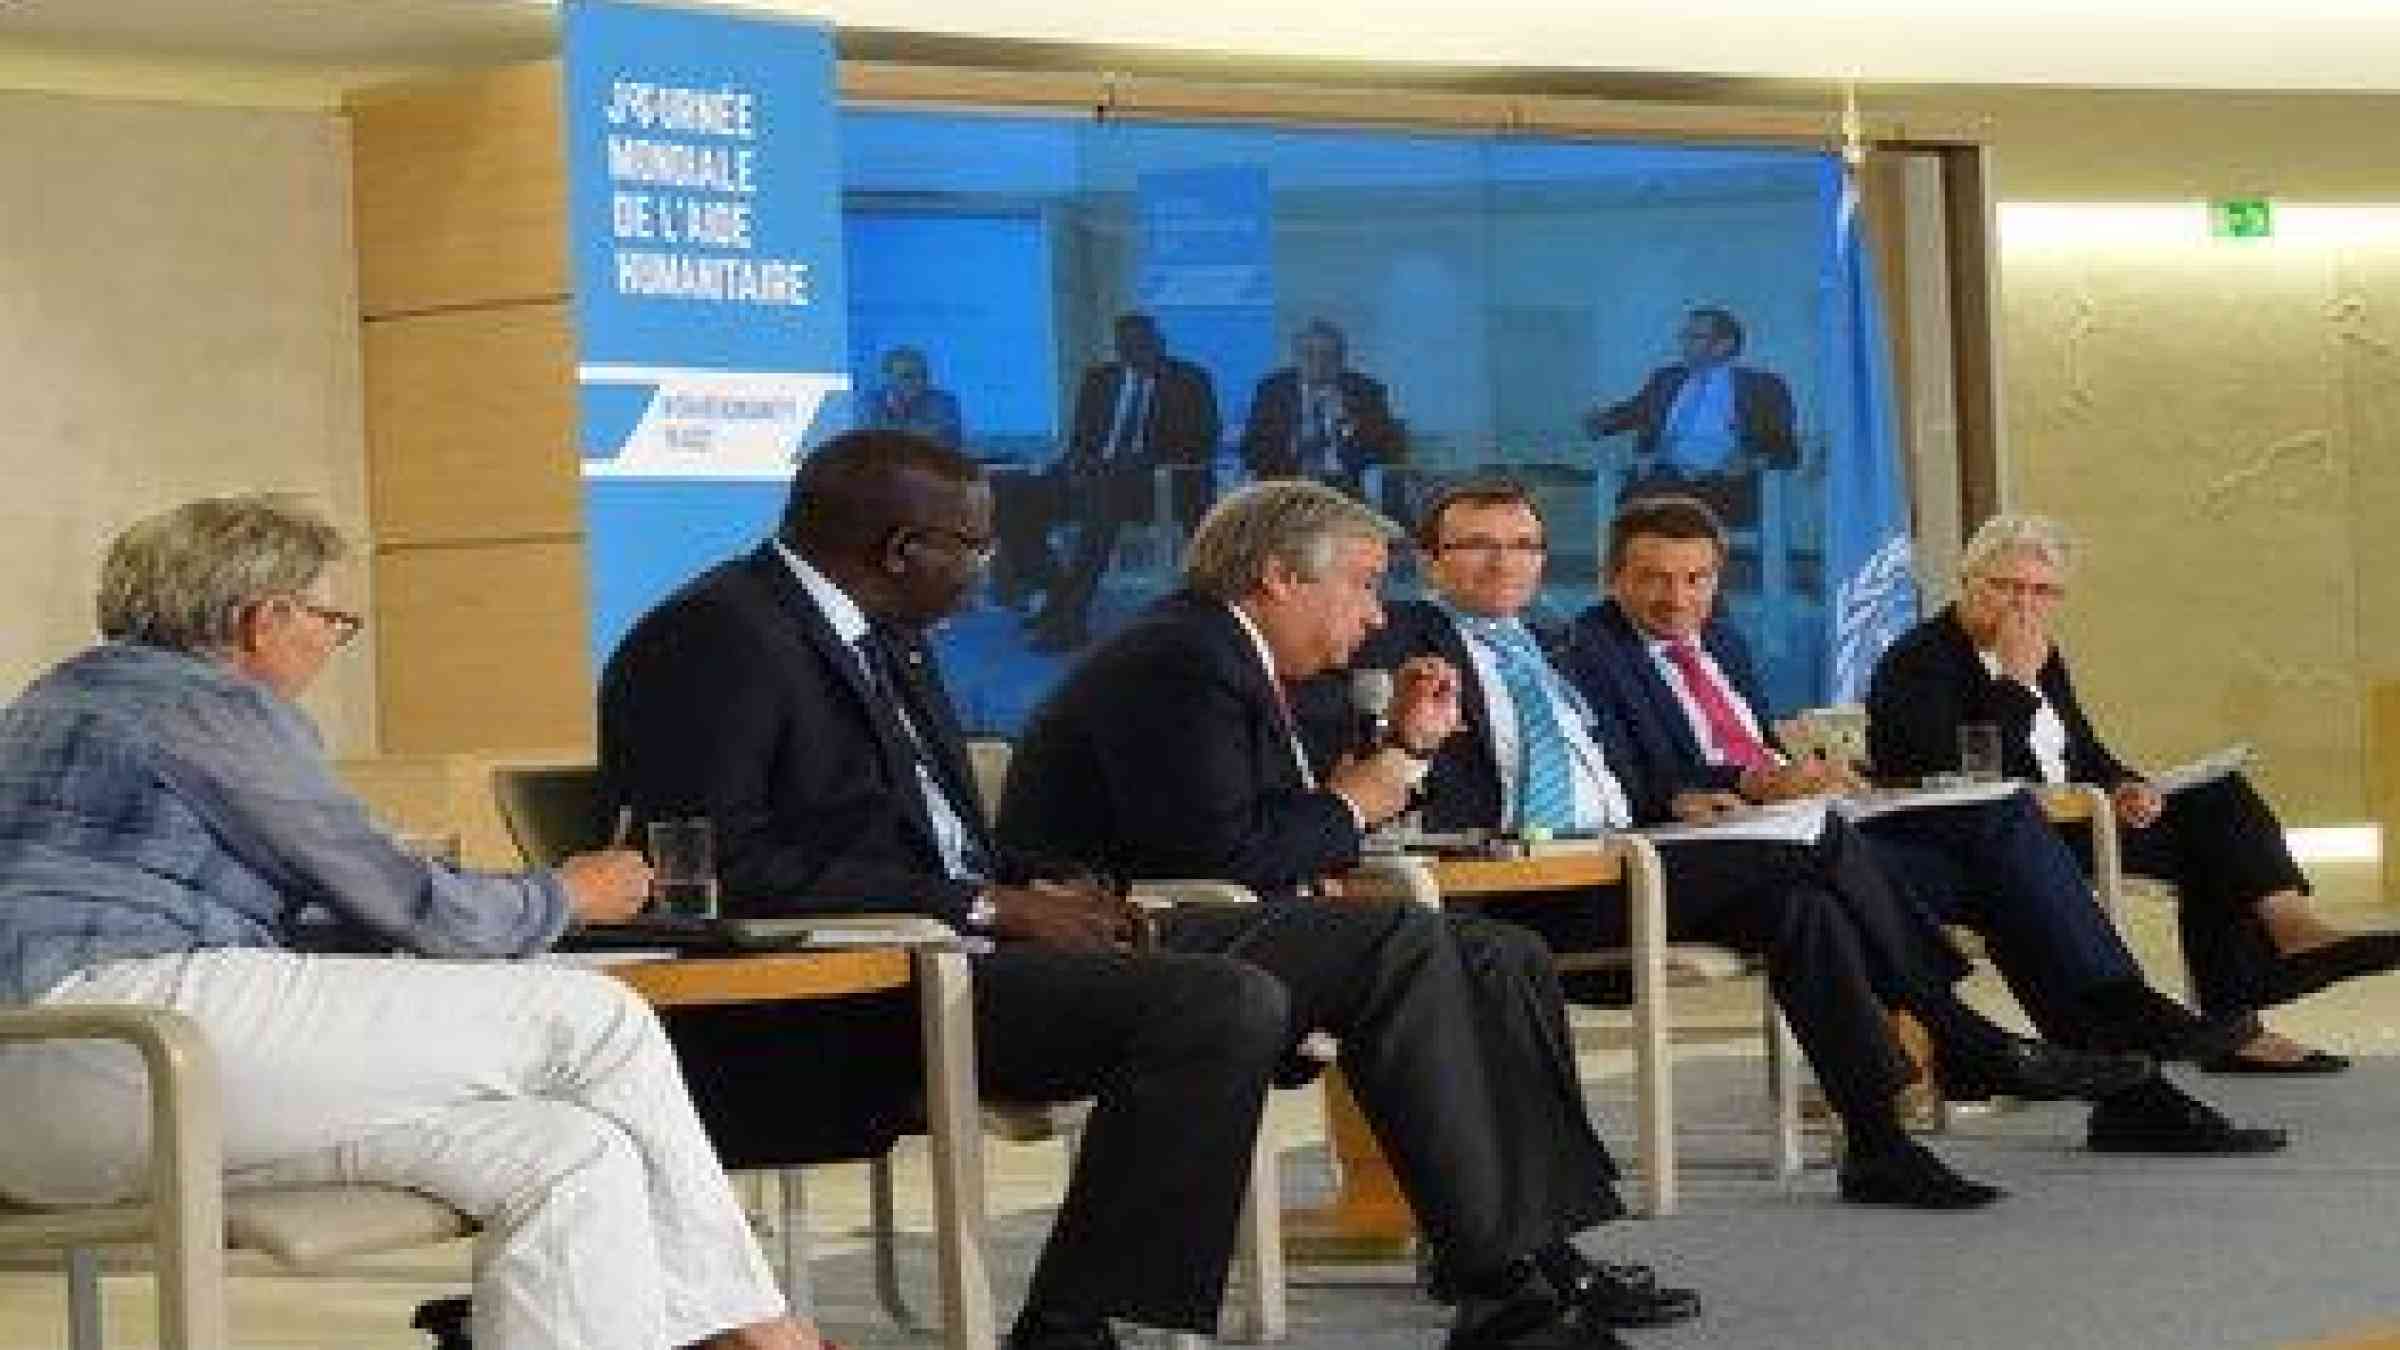 Antonio Guterres, UN High Commissioner for Refugees (with microphone) during a debate in Geneva on World Humanitarian Day with (from left) Nan Buzard, Executive Director ICVA; Elhadj As Sy, Secretary-General of the IFRC; moderator Espen Barth Eide, Managing Director of the World Economic Forum; Peter Maurer, President of the ICRC; and Margareta Wahlström, Special Representative of the UN Secretary-General for Disaster Risk Reduction (Photo: UNISDR)